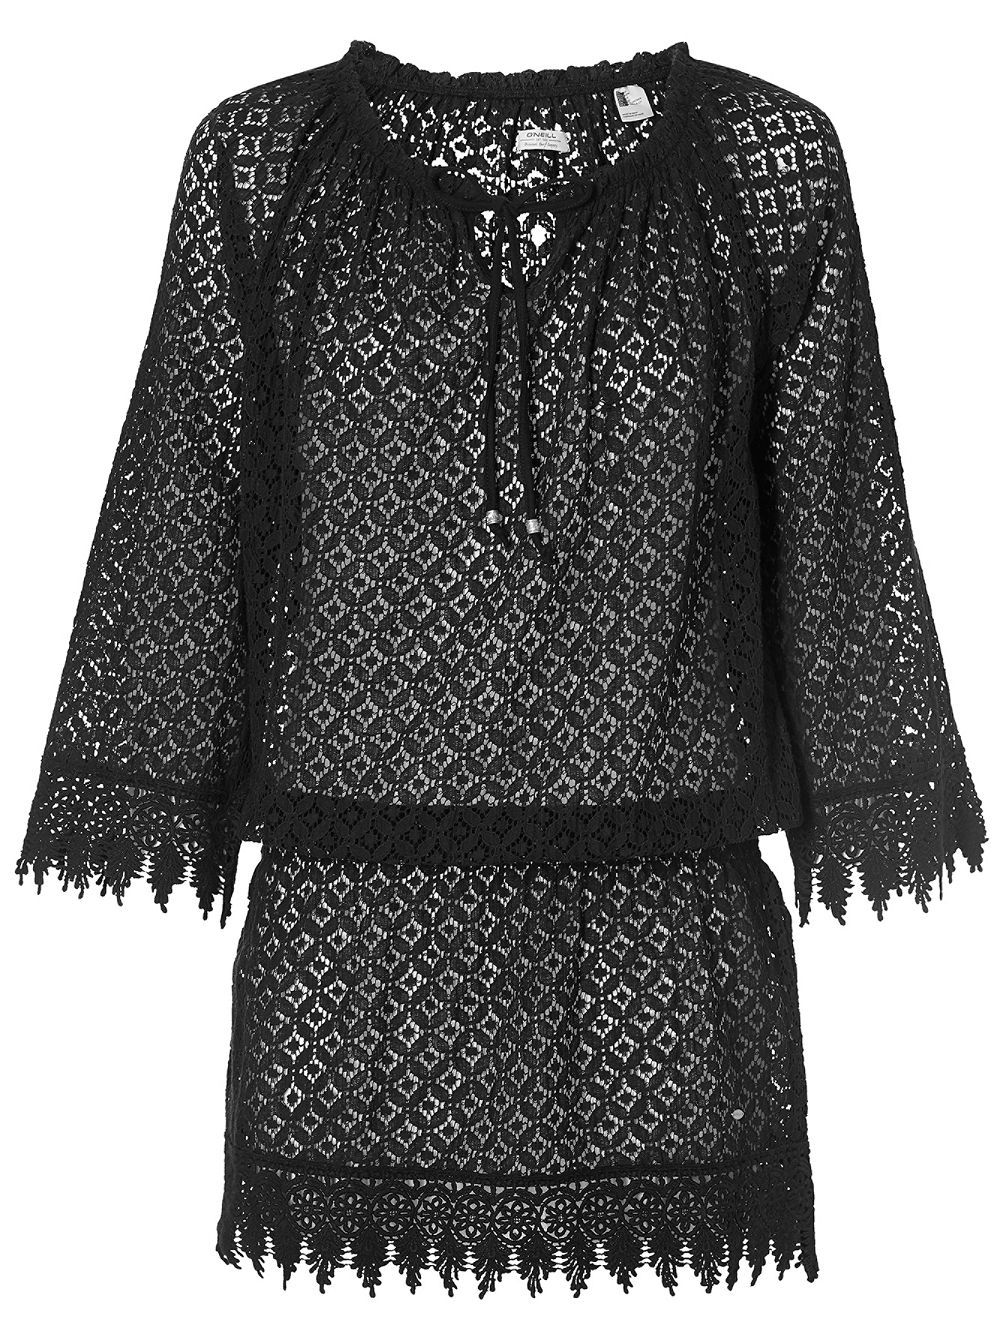 Lace Beach Cover Up Jurk